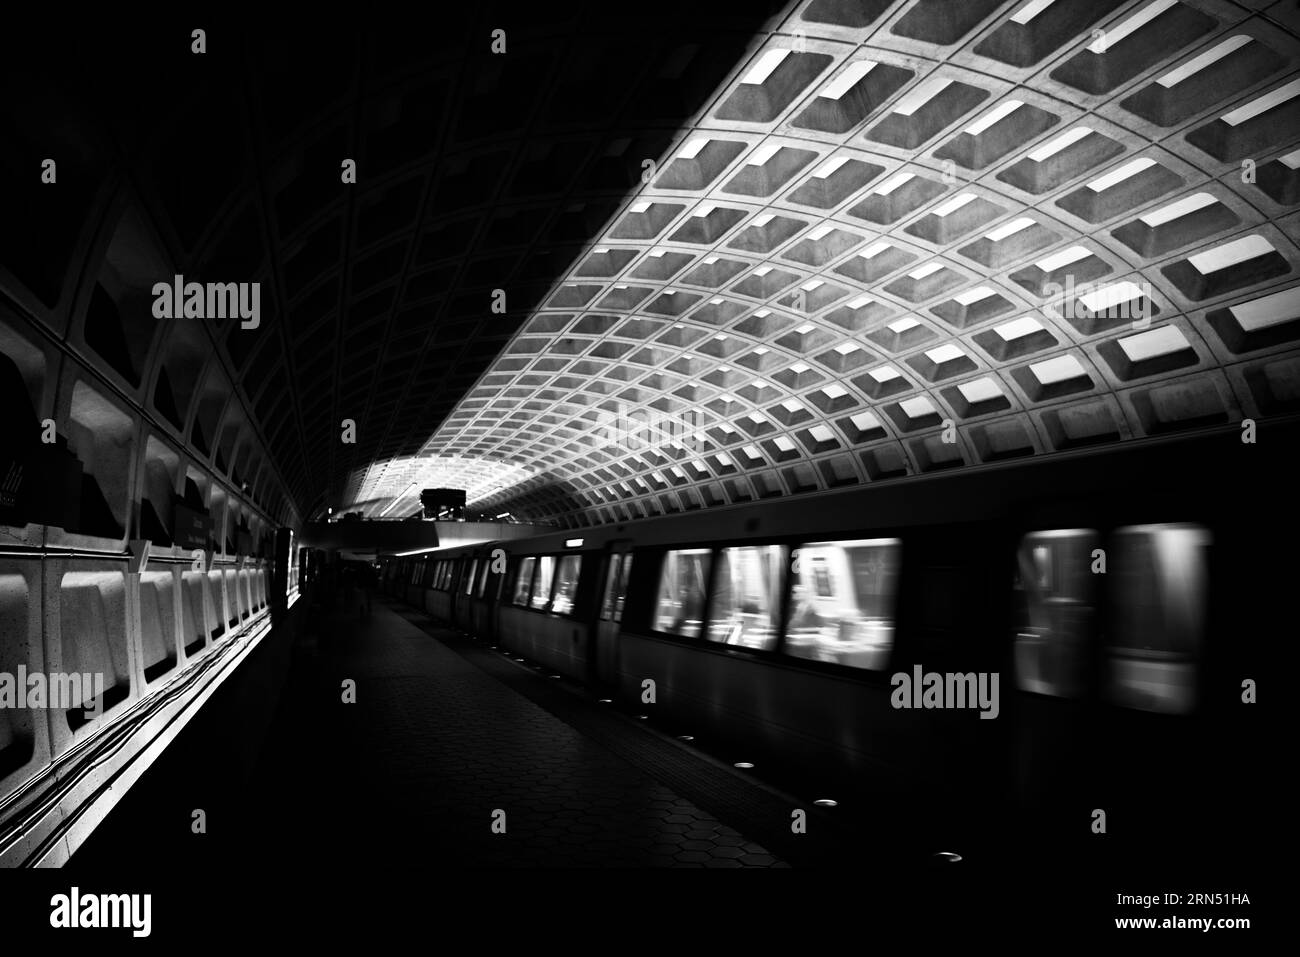 WASHINGTON DC, United States — A black and white photography of a Washington DC Metro station, representing one of the key transportation hubs that serve the nation's capital. The Metro system plays an essential role in the daily transit of thousands, connecting neighborhoods, business districts, and points of interest. Stock Photo